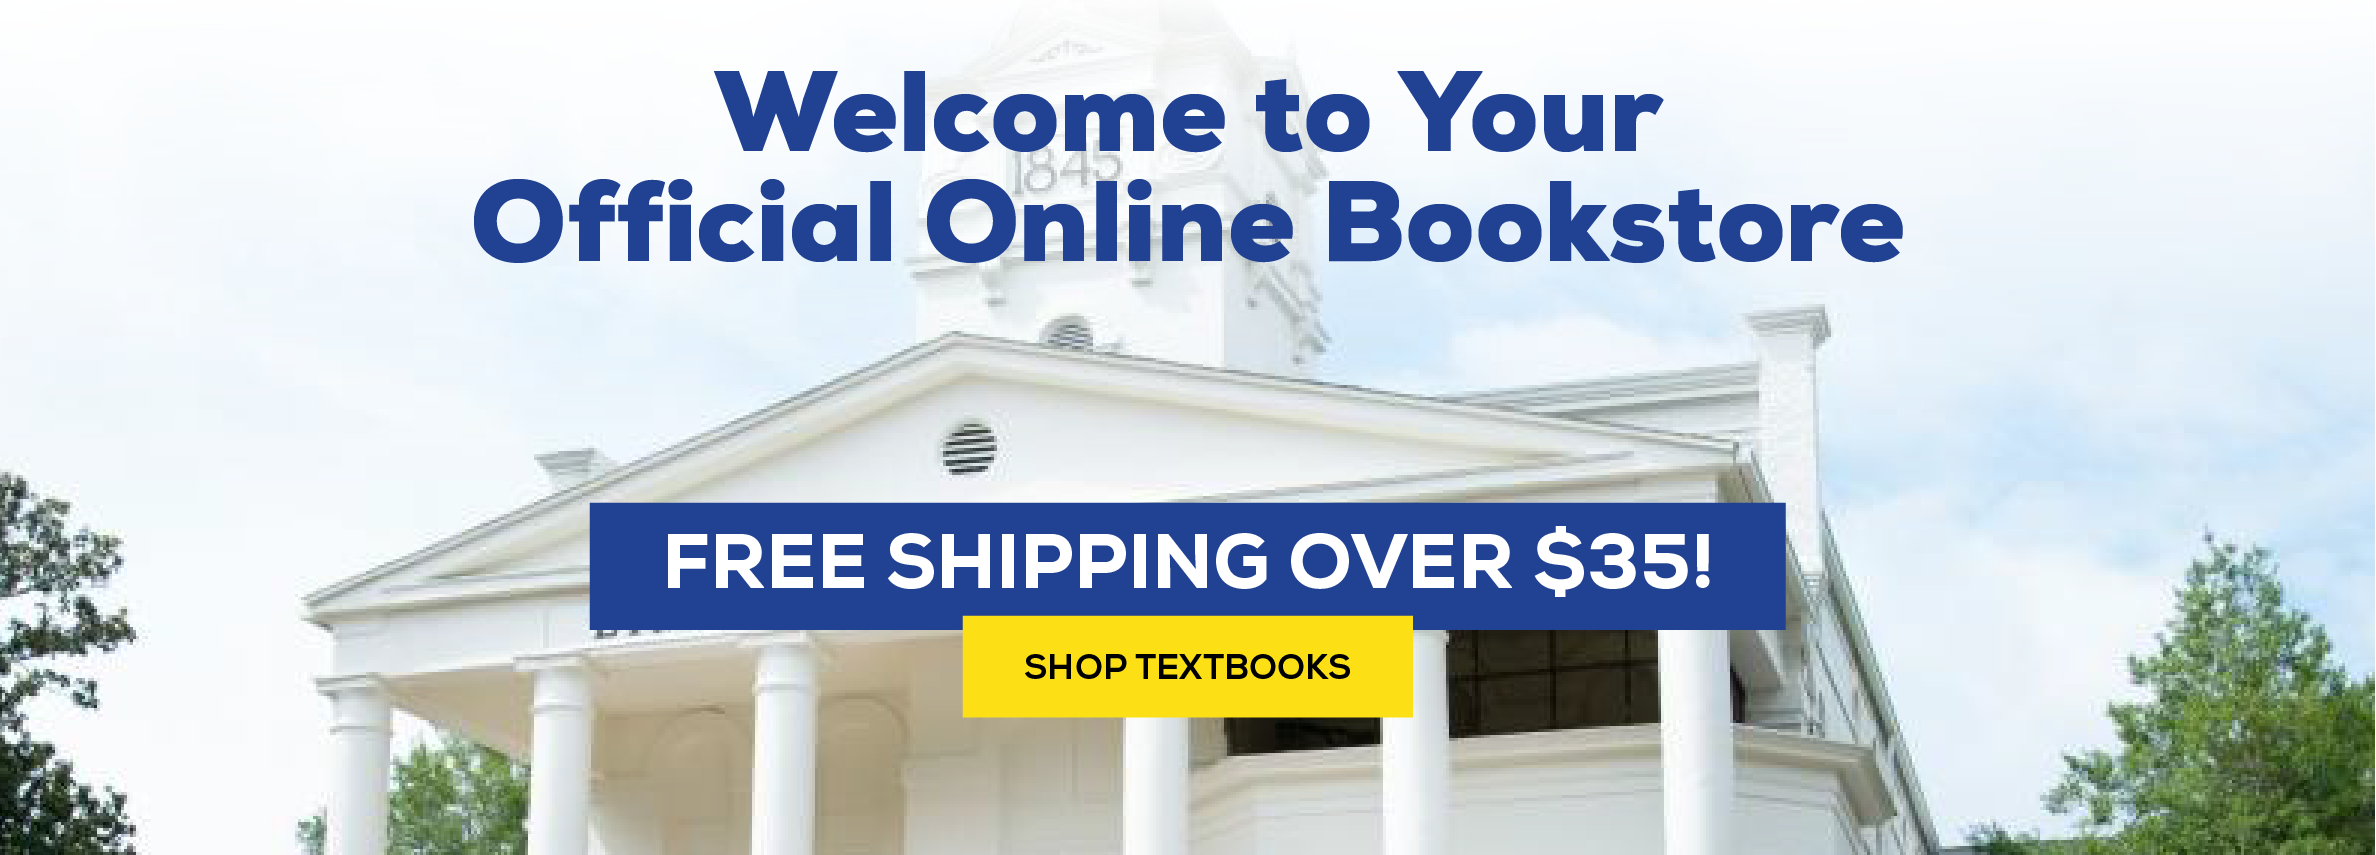 Welcome to your official online bookstore. free shipping over $35! shop textbooks